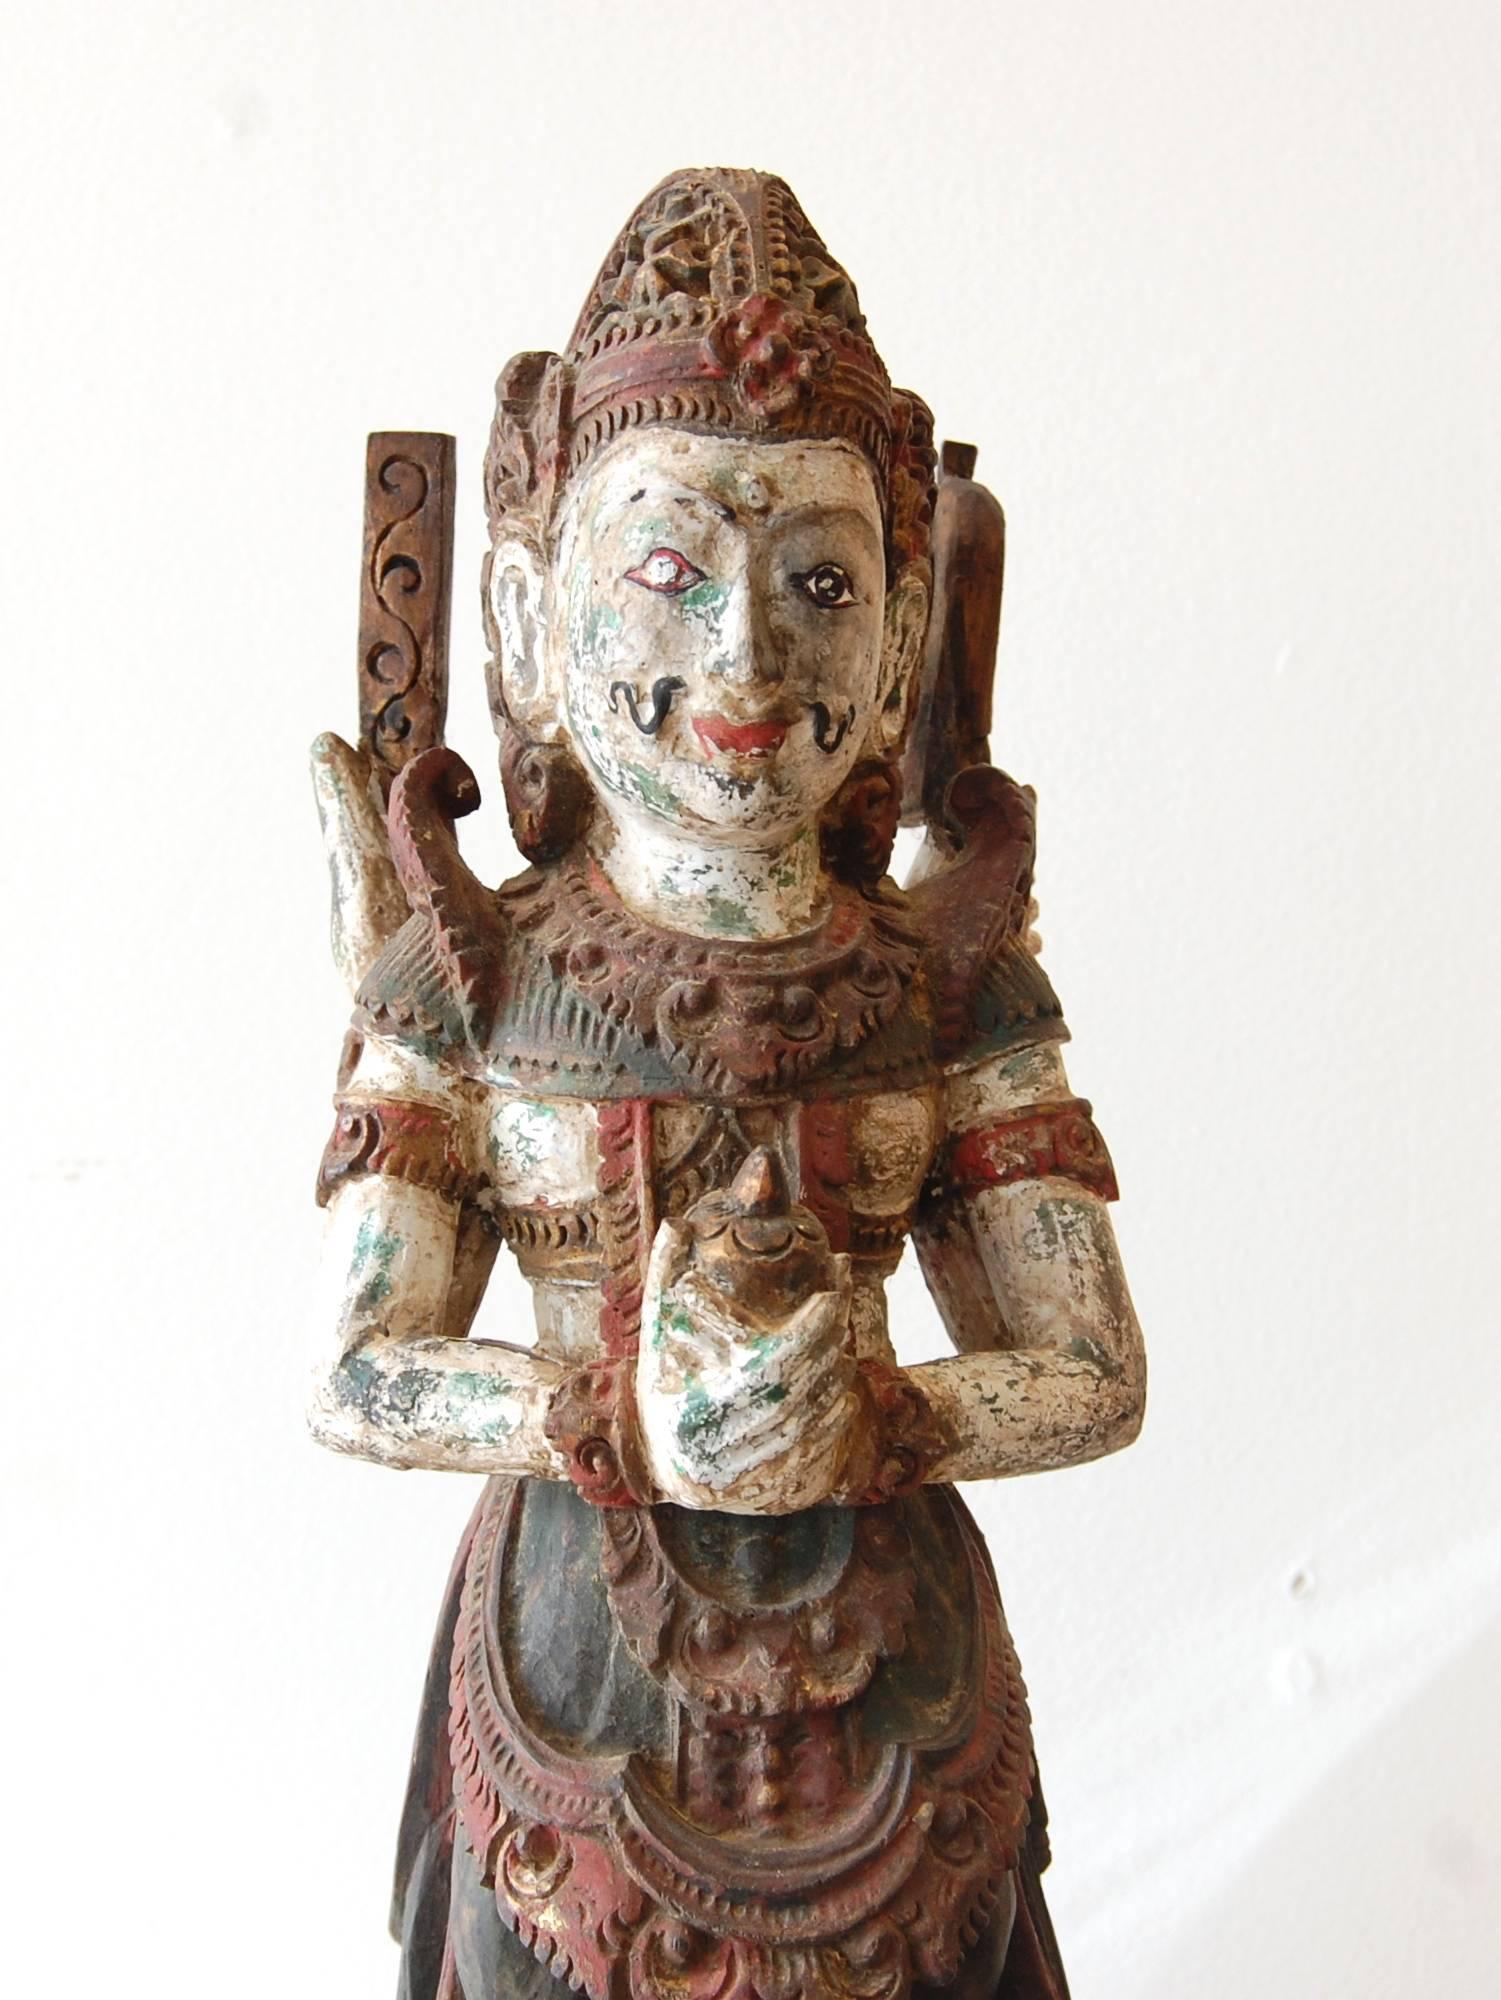  Shiva Standing On The Bull Nandi Wood Sculpture - Brown Figurative Sculpture by Unknown